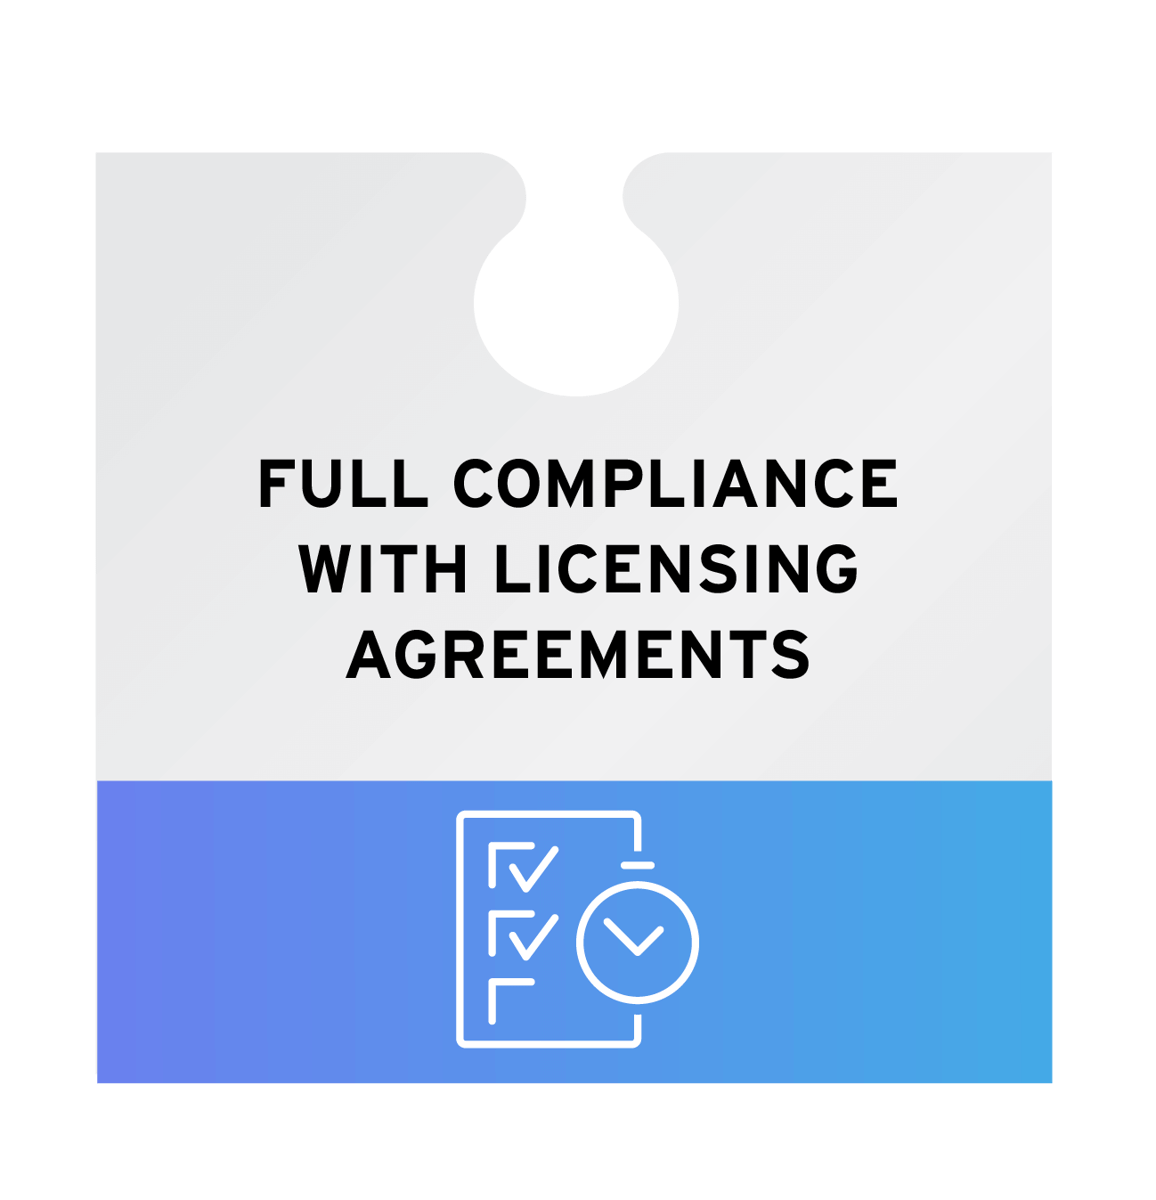 Full compliance with licensing agreements